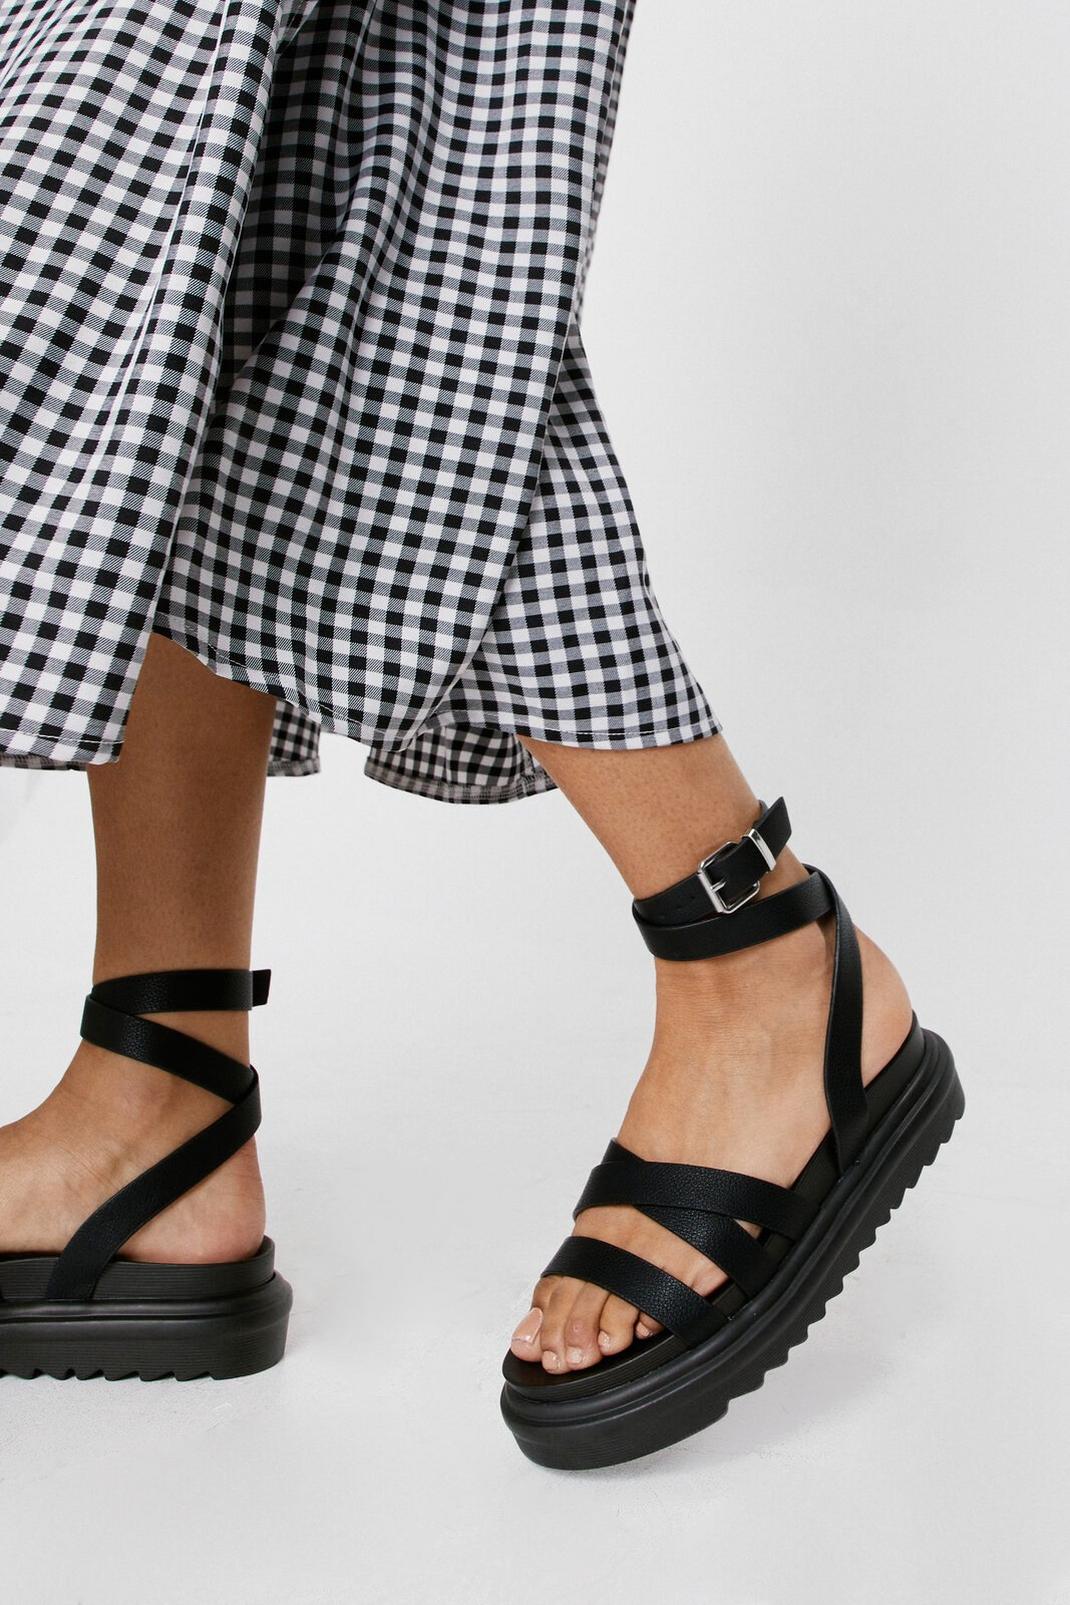 NastyGal + Chunky Crossover Strap Sandals